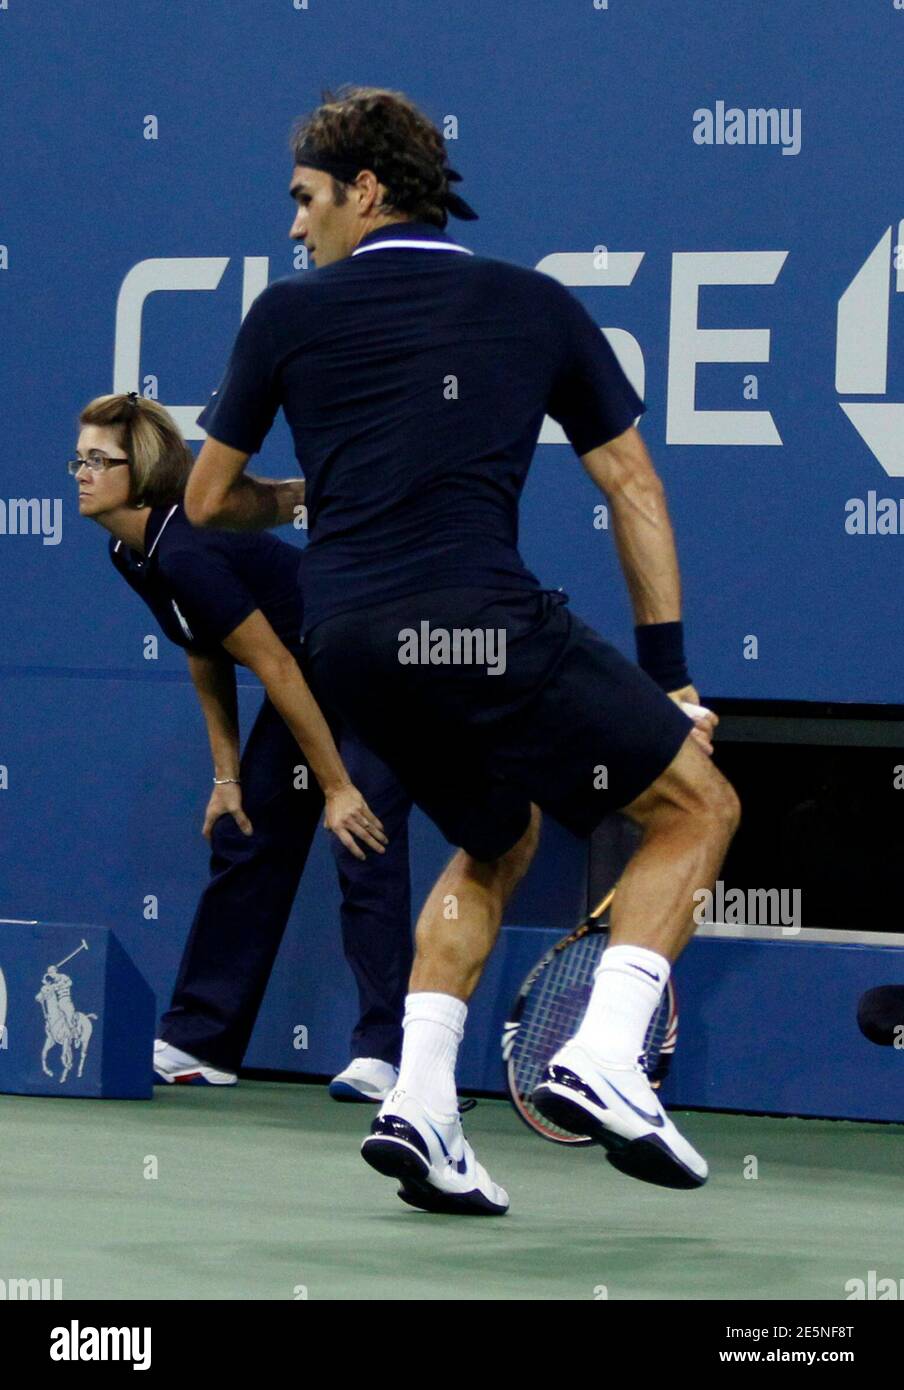 Roger Federer of Switzerland returns a winning shot between his legs while  playing Brian Dabul of Argentina during their opening night match at the  U.S. Open tennis tournament in New York, August